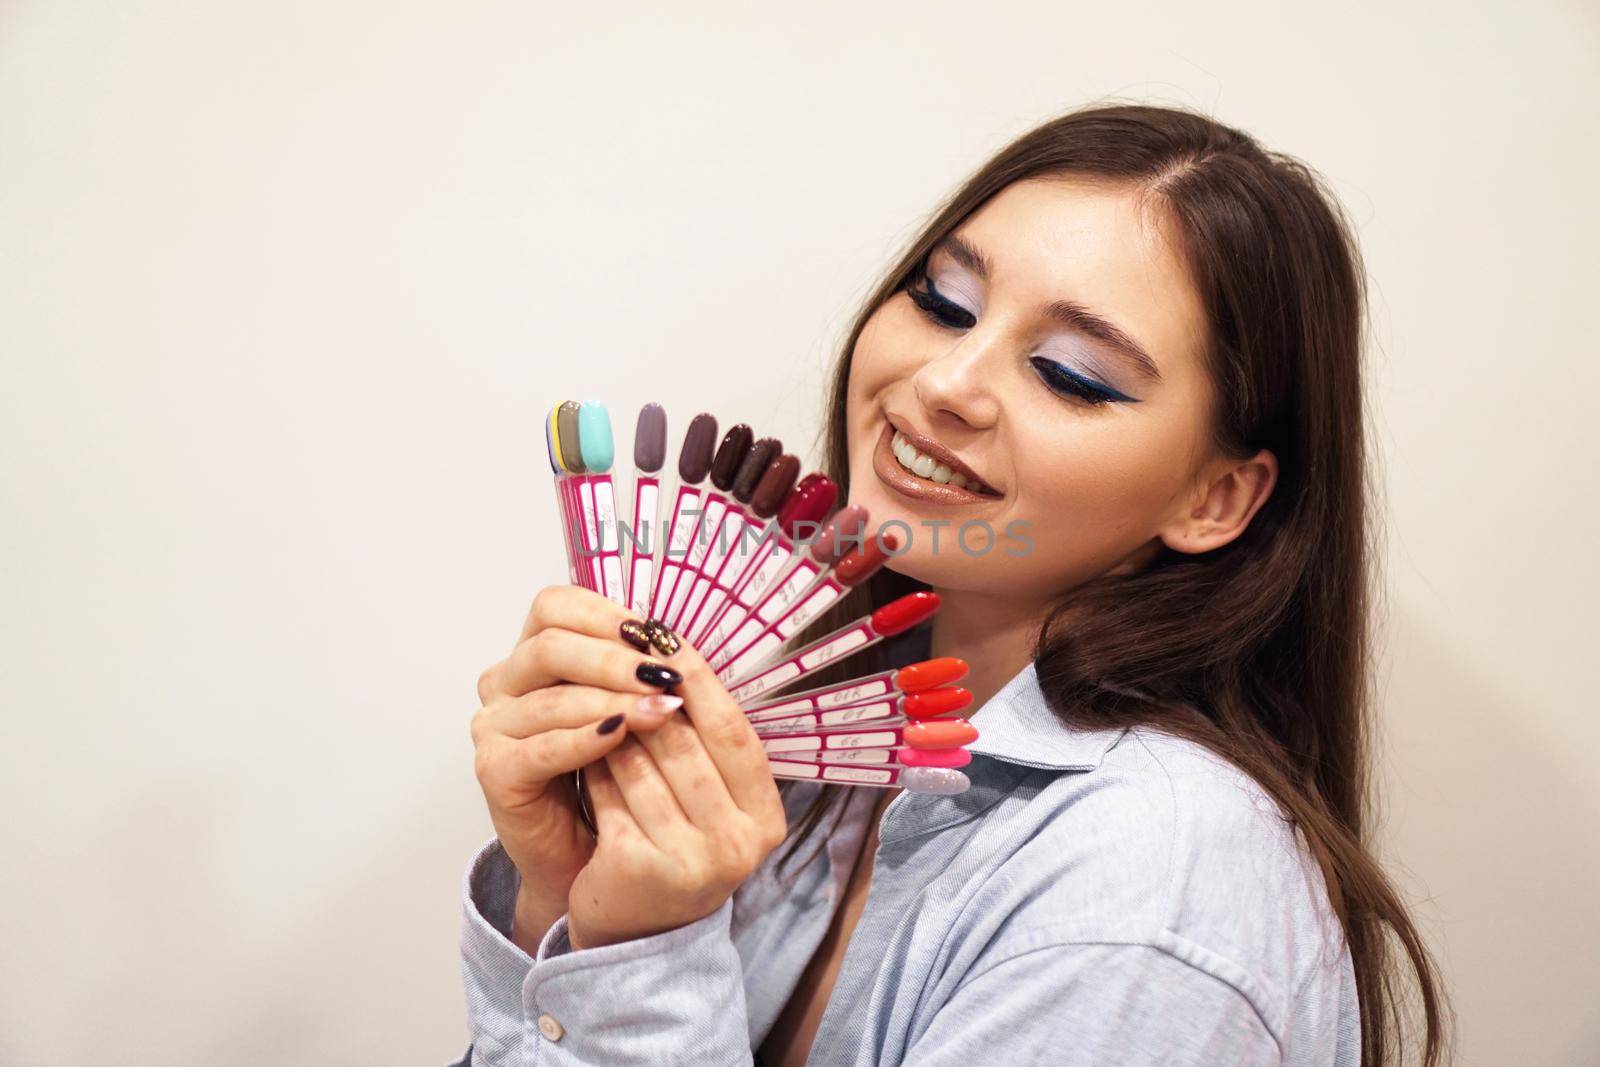 Pretty young woman smiling, holding a manicure and pedicure nail polish palette in a hand. Cosmetic products. Beauty salon.